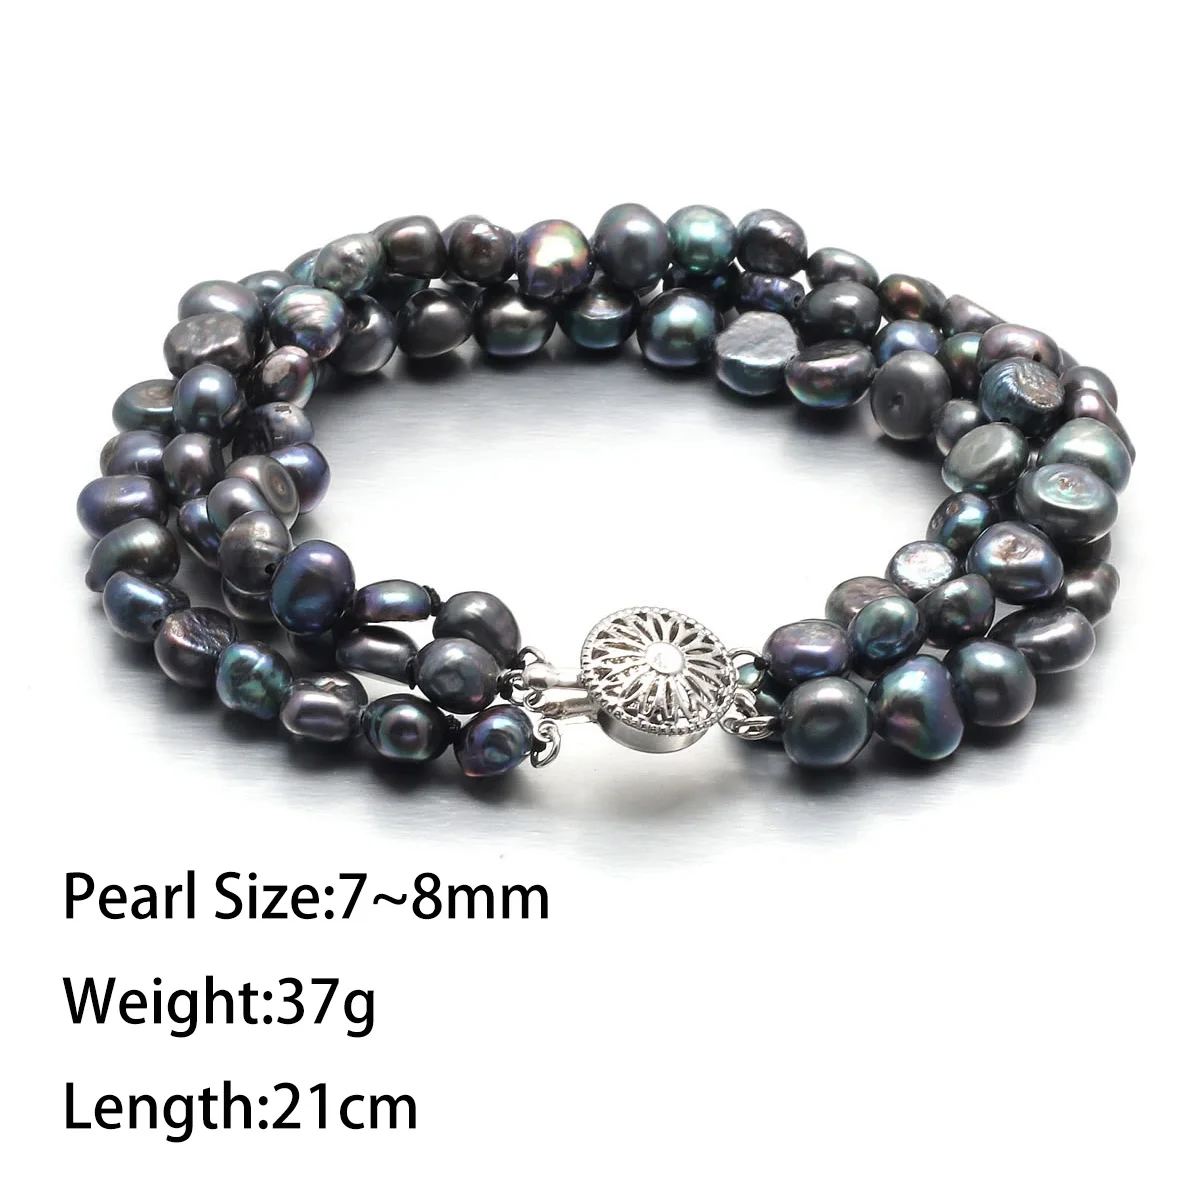 7-8mm Black Baroque 3 Rows Natural Freshwater Pearl Bracelets Jewelry Bangle for Women